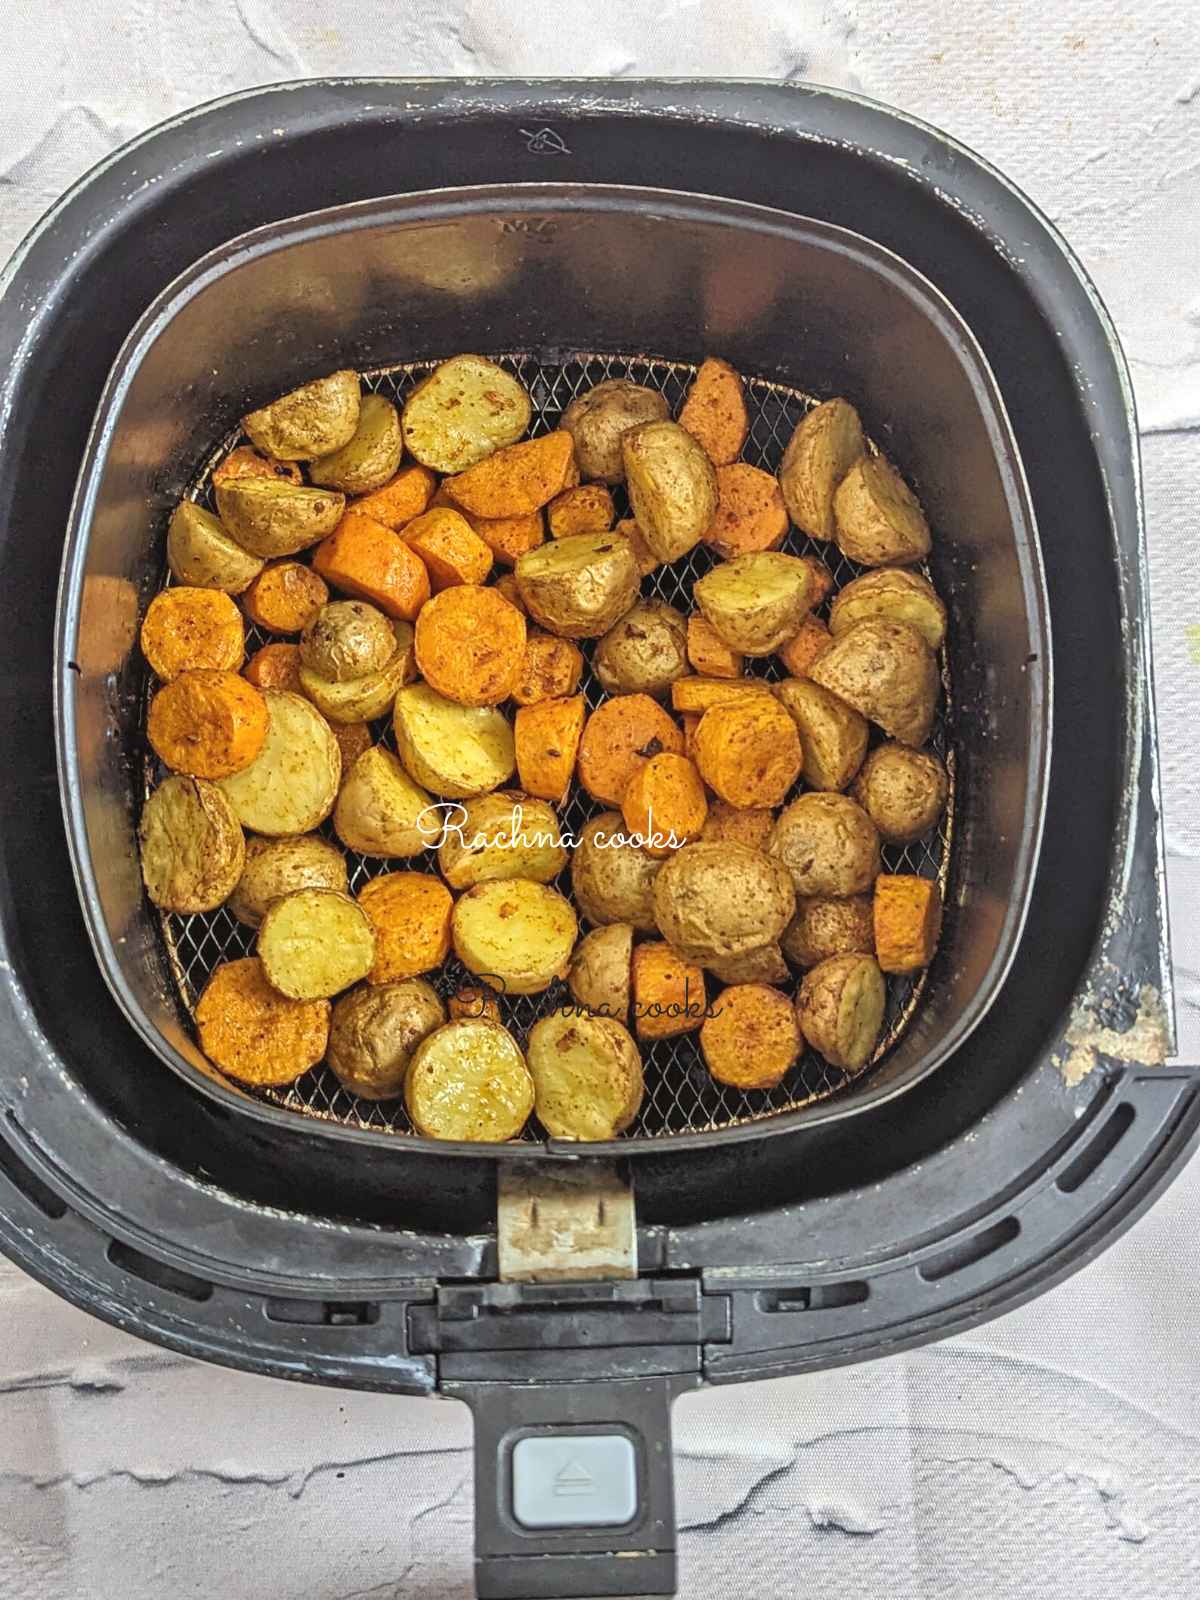 Air fried golden carrots and potatoes after air frying in air fryer basket